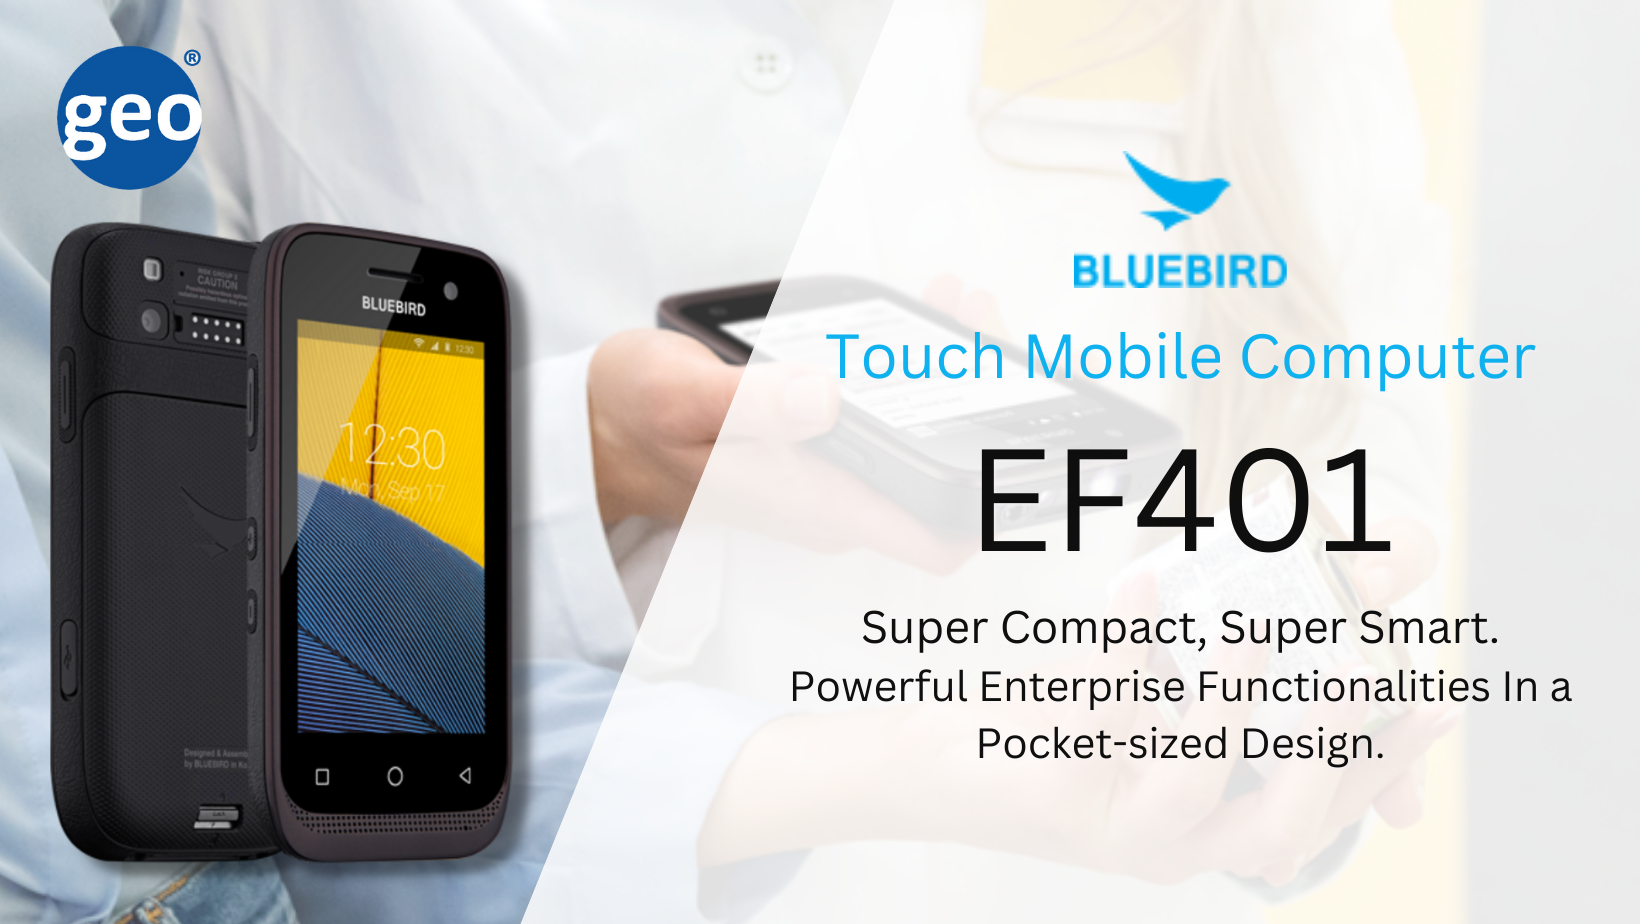 Bluebird: EF401 Touch Mobile Computer is ergonomically designed for comfortable single-handed operation. 